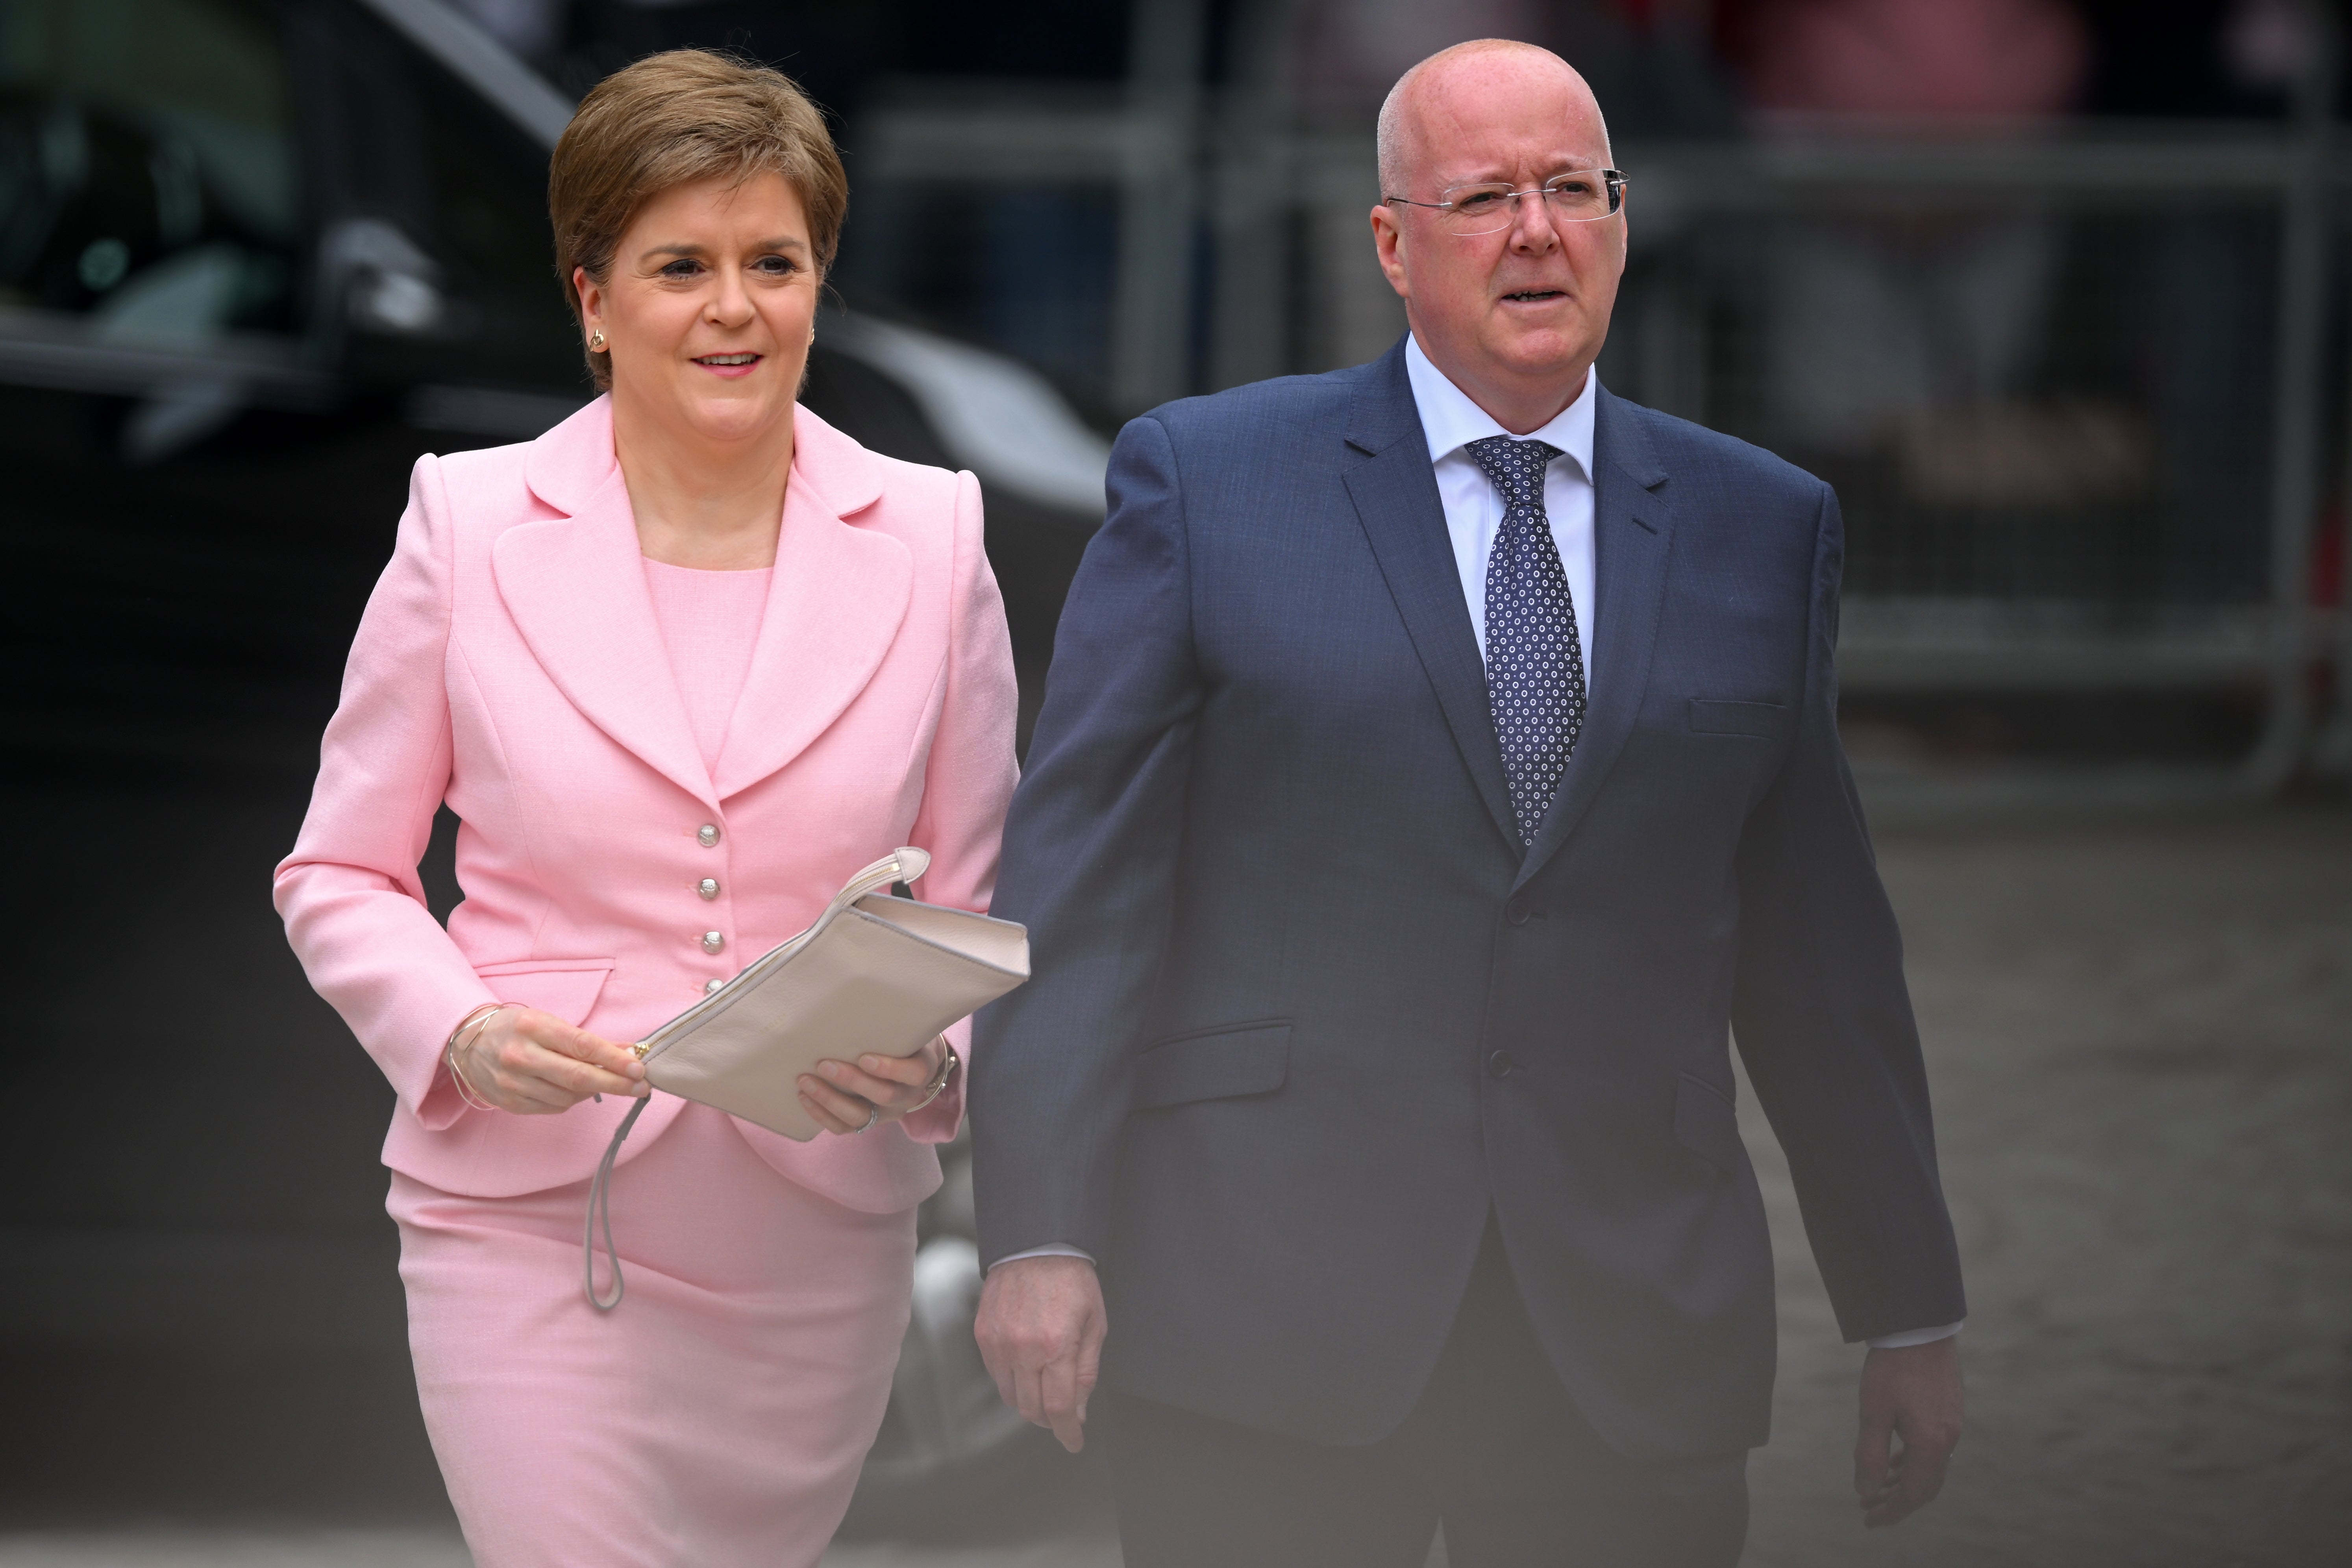 Mr Murrell, pictured with his wife Ms Sturgeon, was released without charge